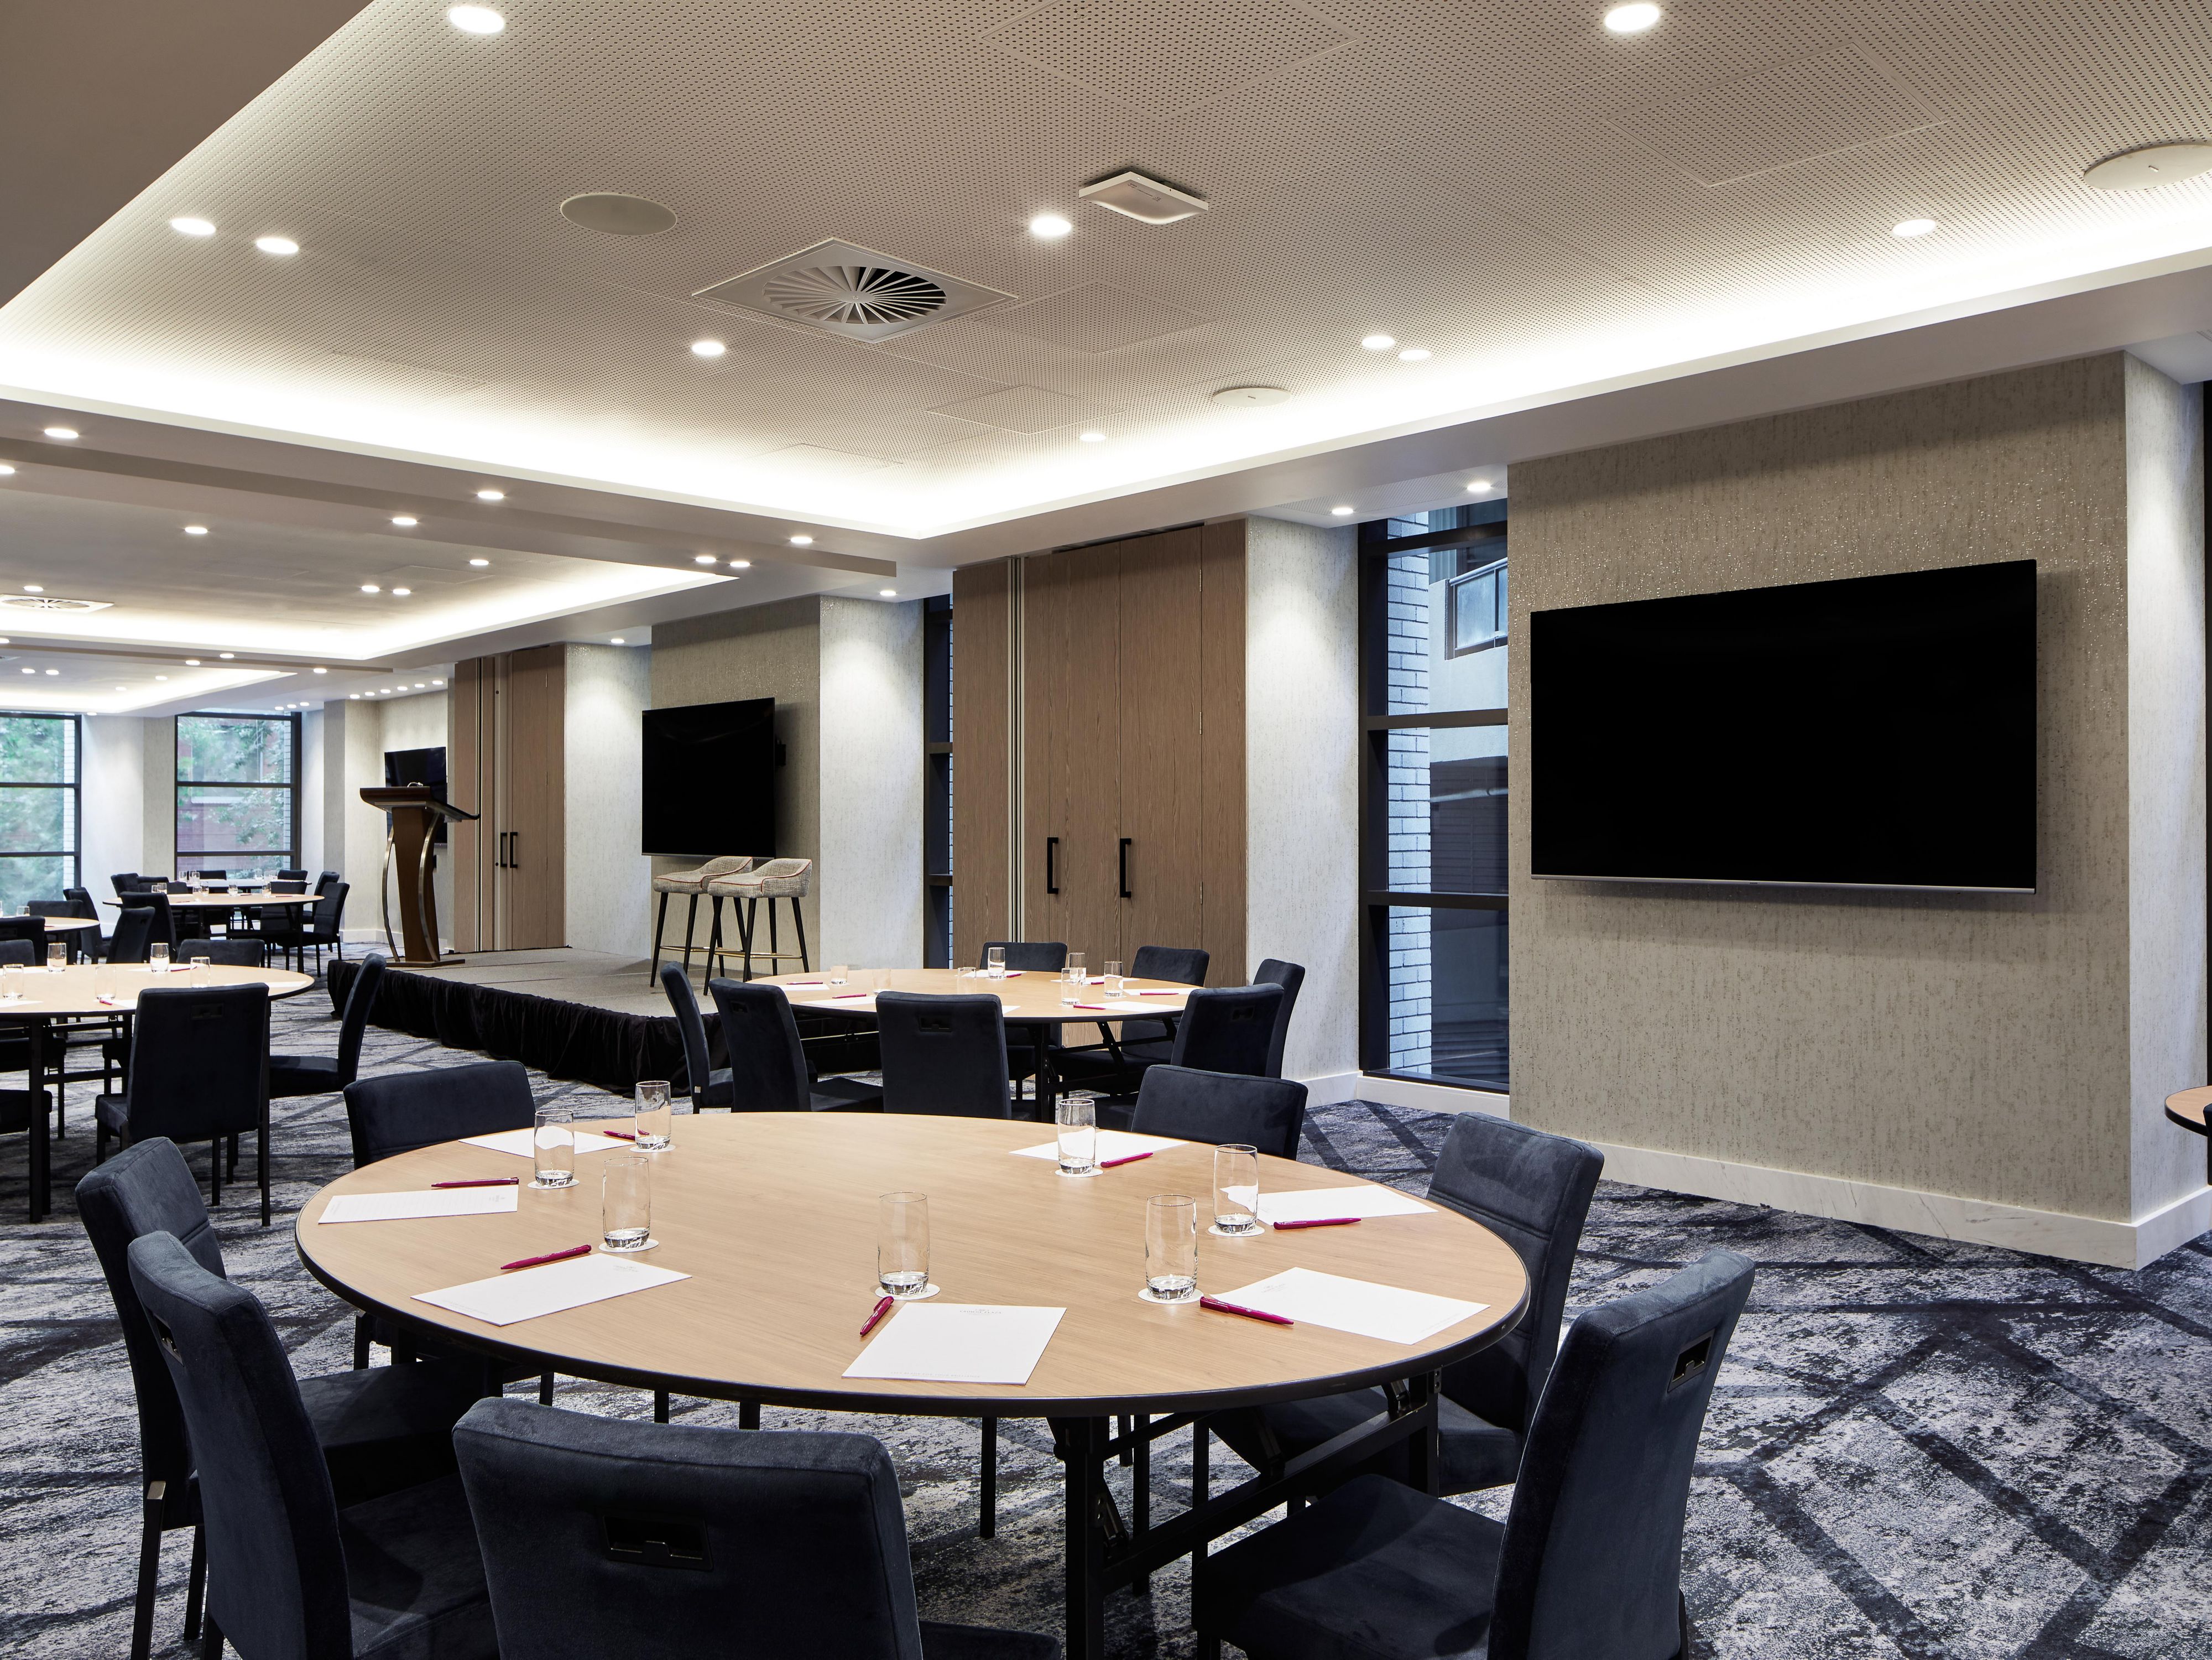 Book your next conference close to Sydney CBD. We have a secure underground parking and state of the art Audio Visual Equipment.